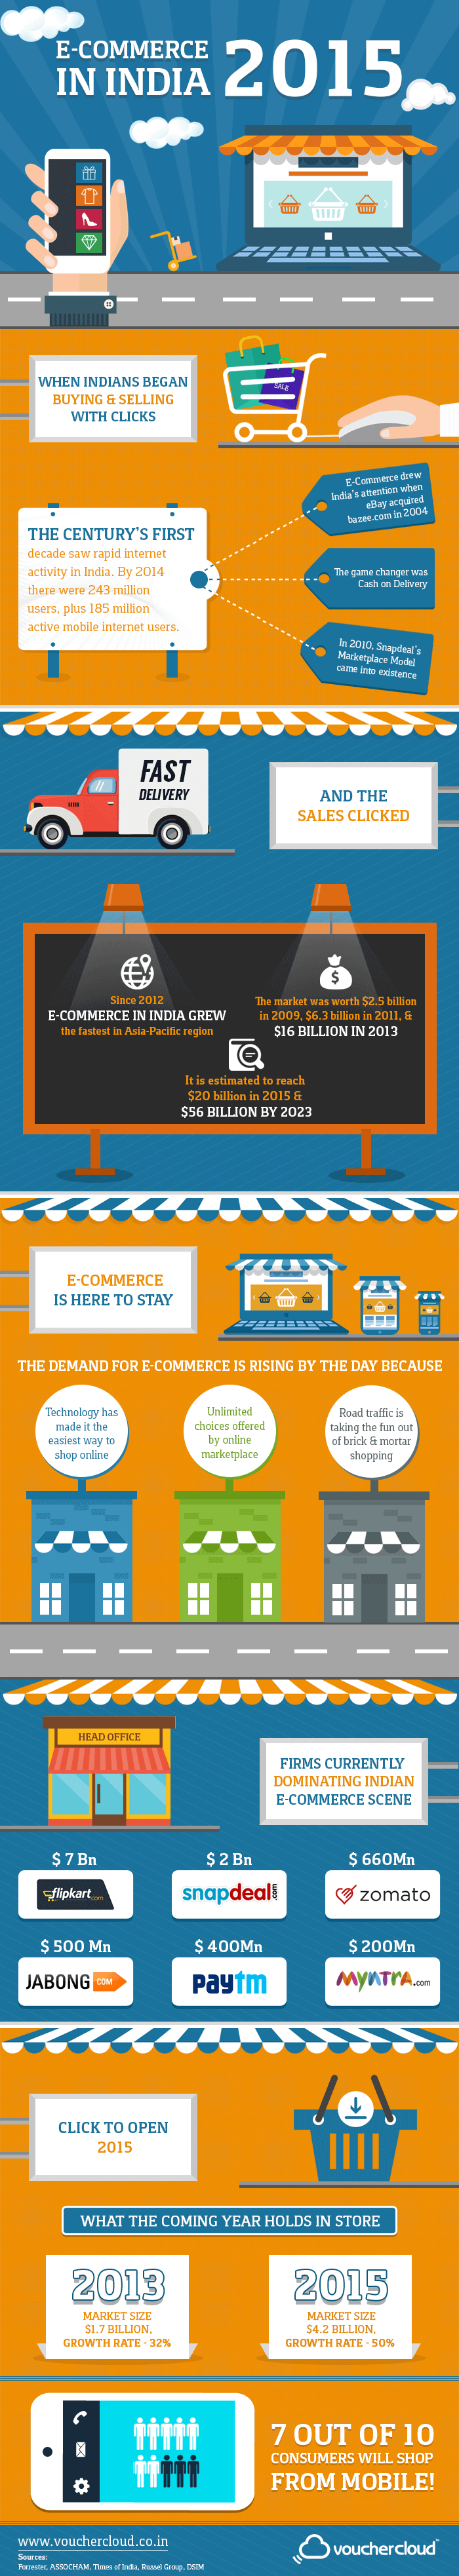 ECommerce in India